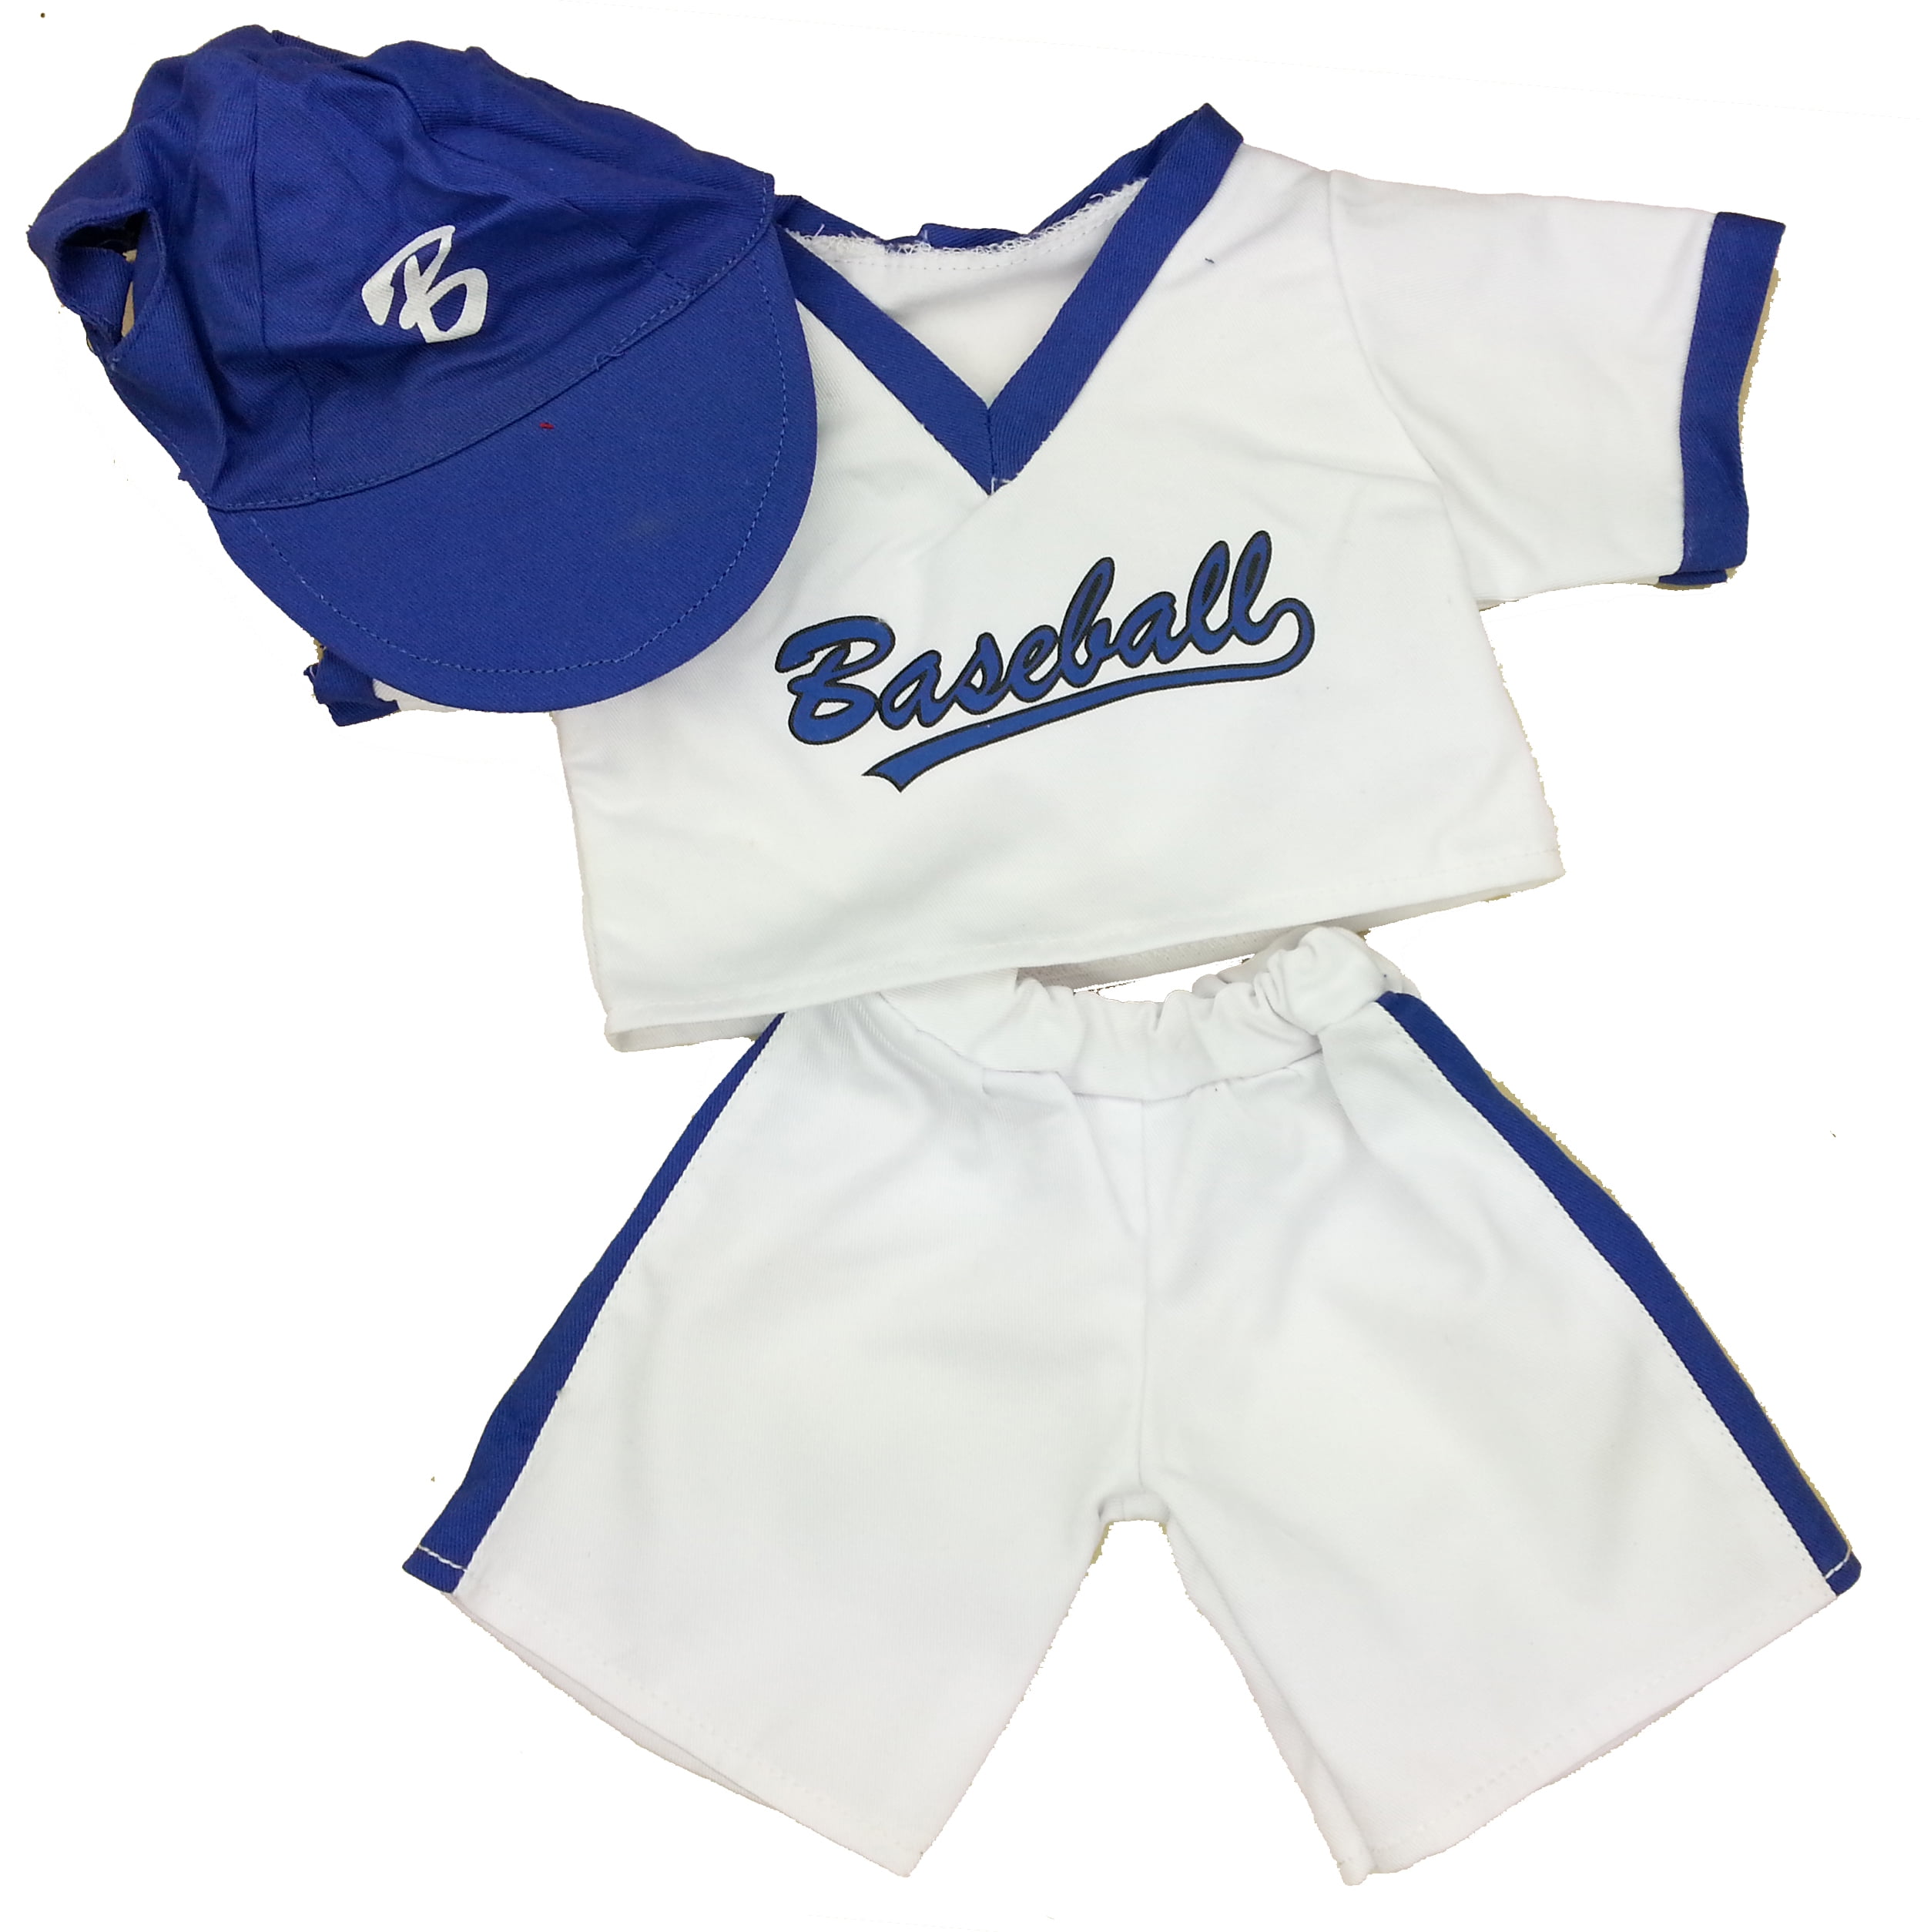 New*BASEBALL Outfit Accessories #01 Free Ship for 8-10 inch Teddy Bear/Doll 